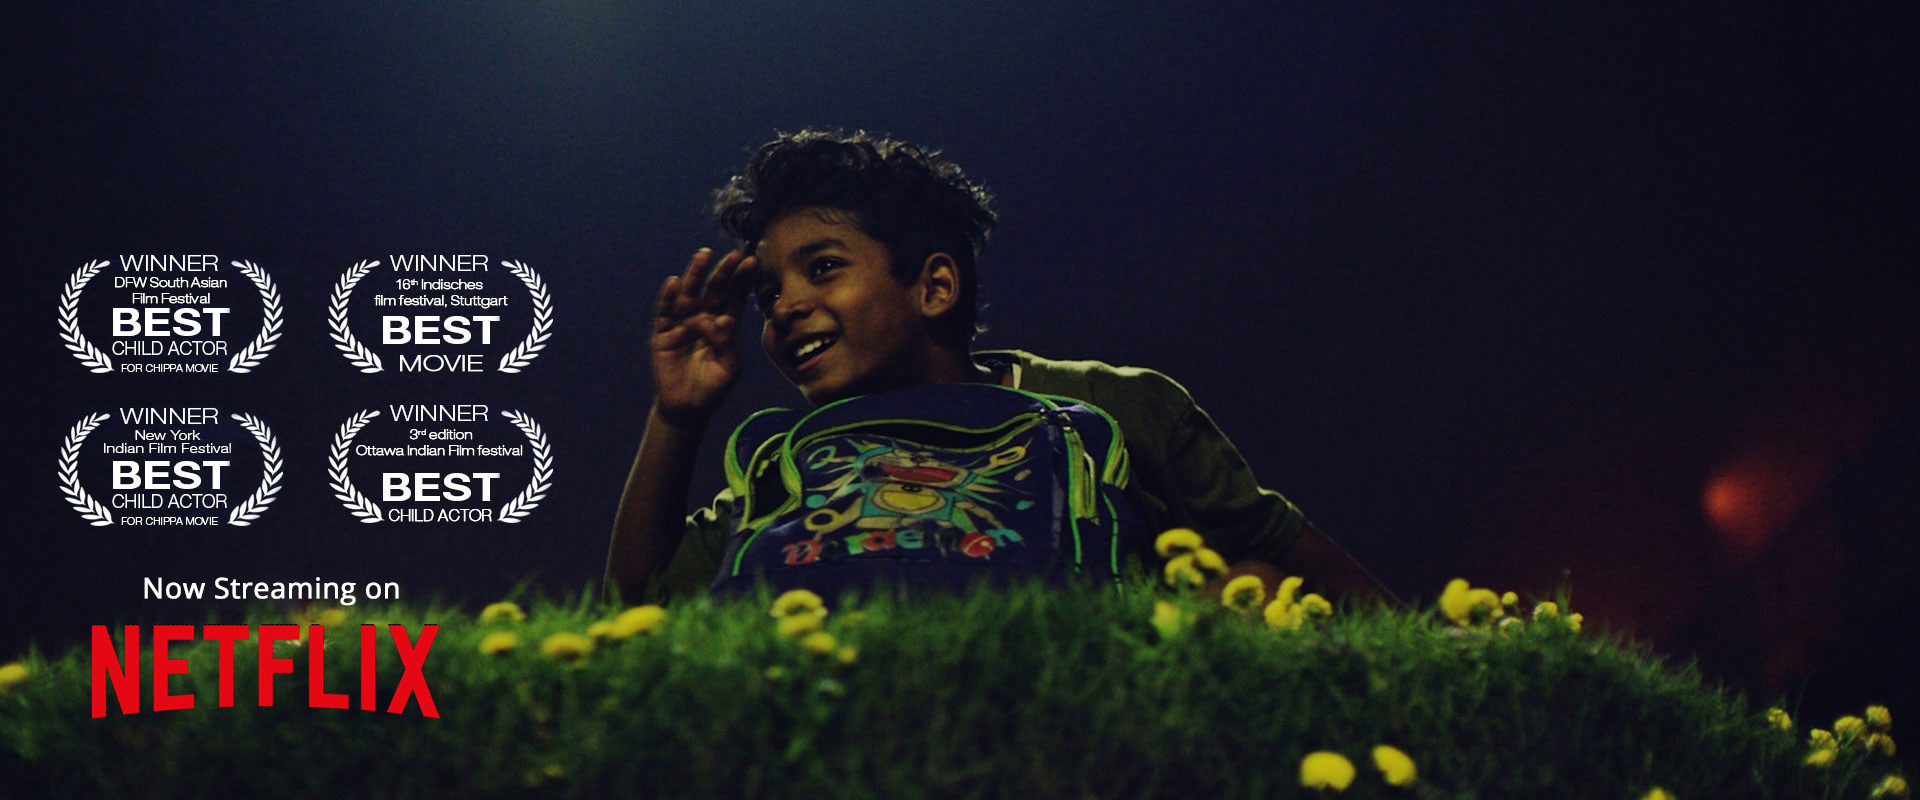 Sunny Pawar won the Best Child Actor award for his performance in ‘Chippa’ at 19th New York Indian Film Festival